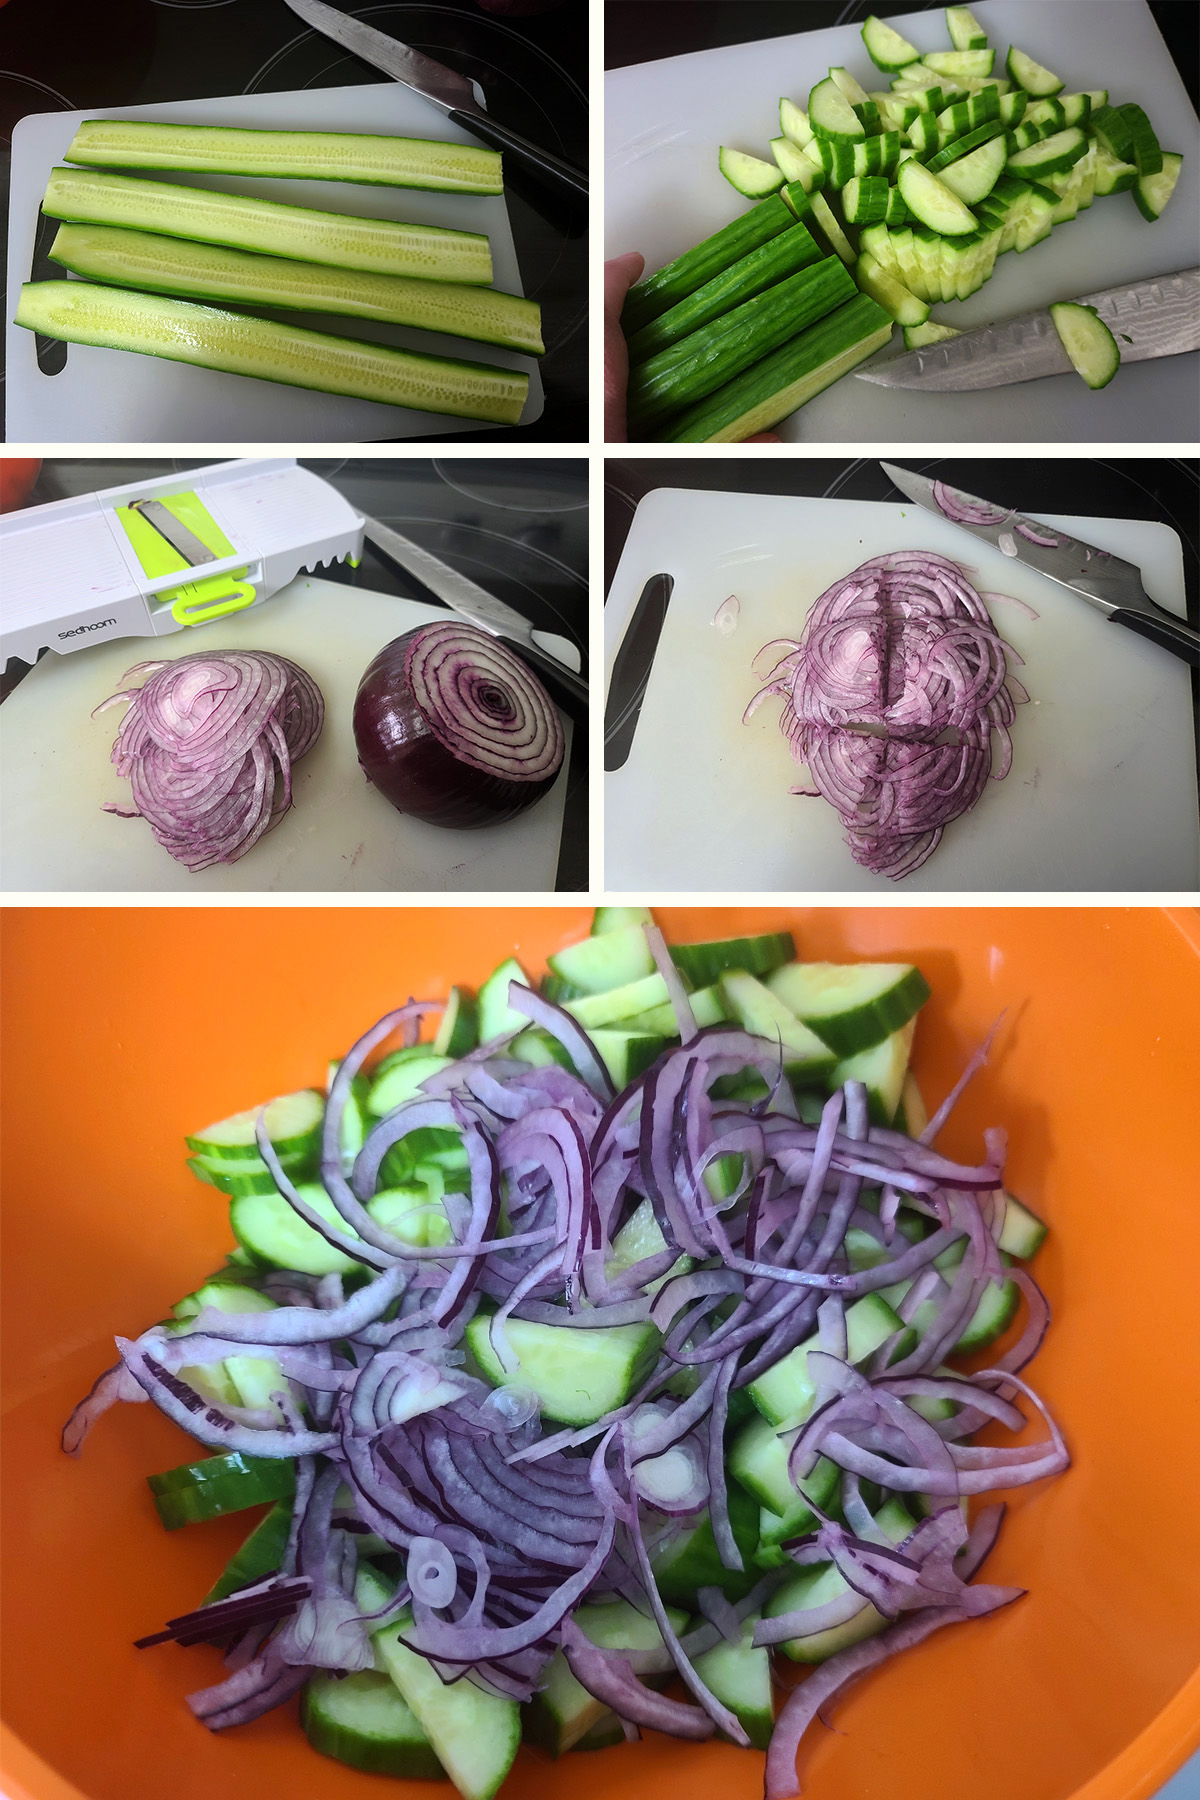 A 5 part image showing the cucumbers and red onion being sliced up into an orange bowl.